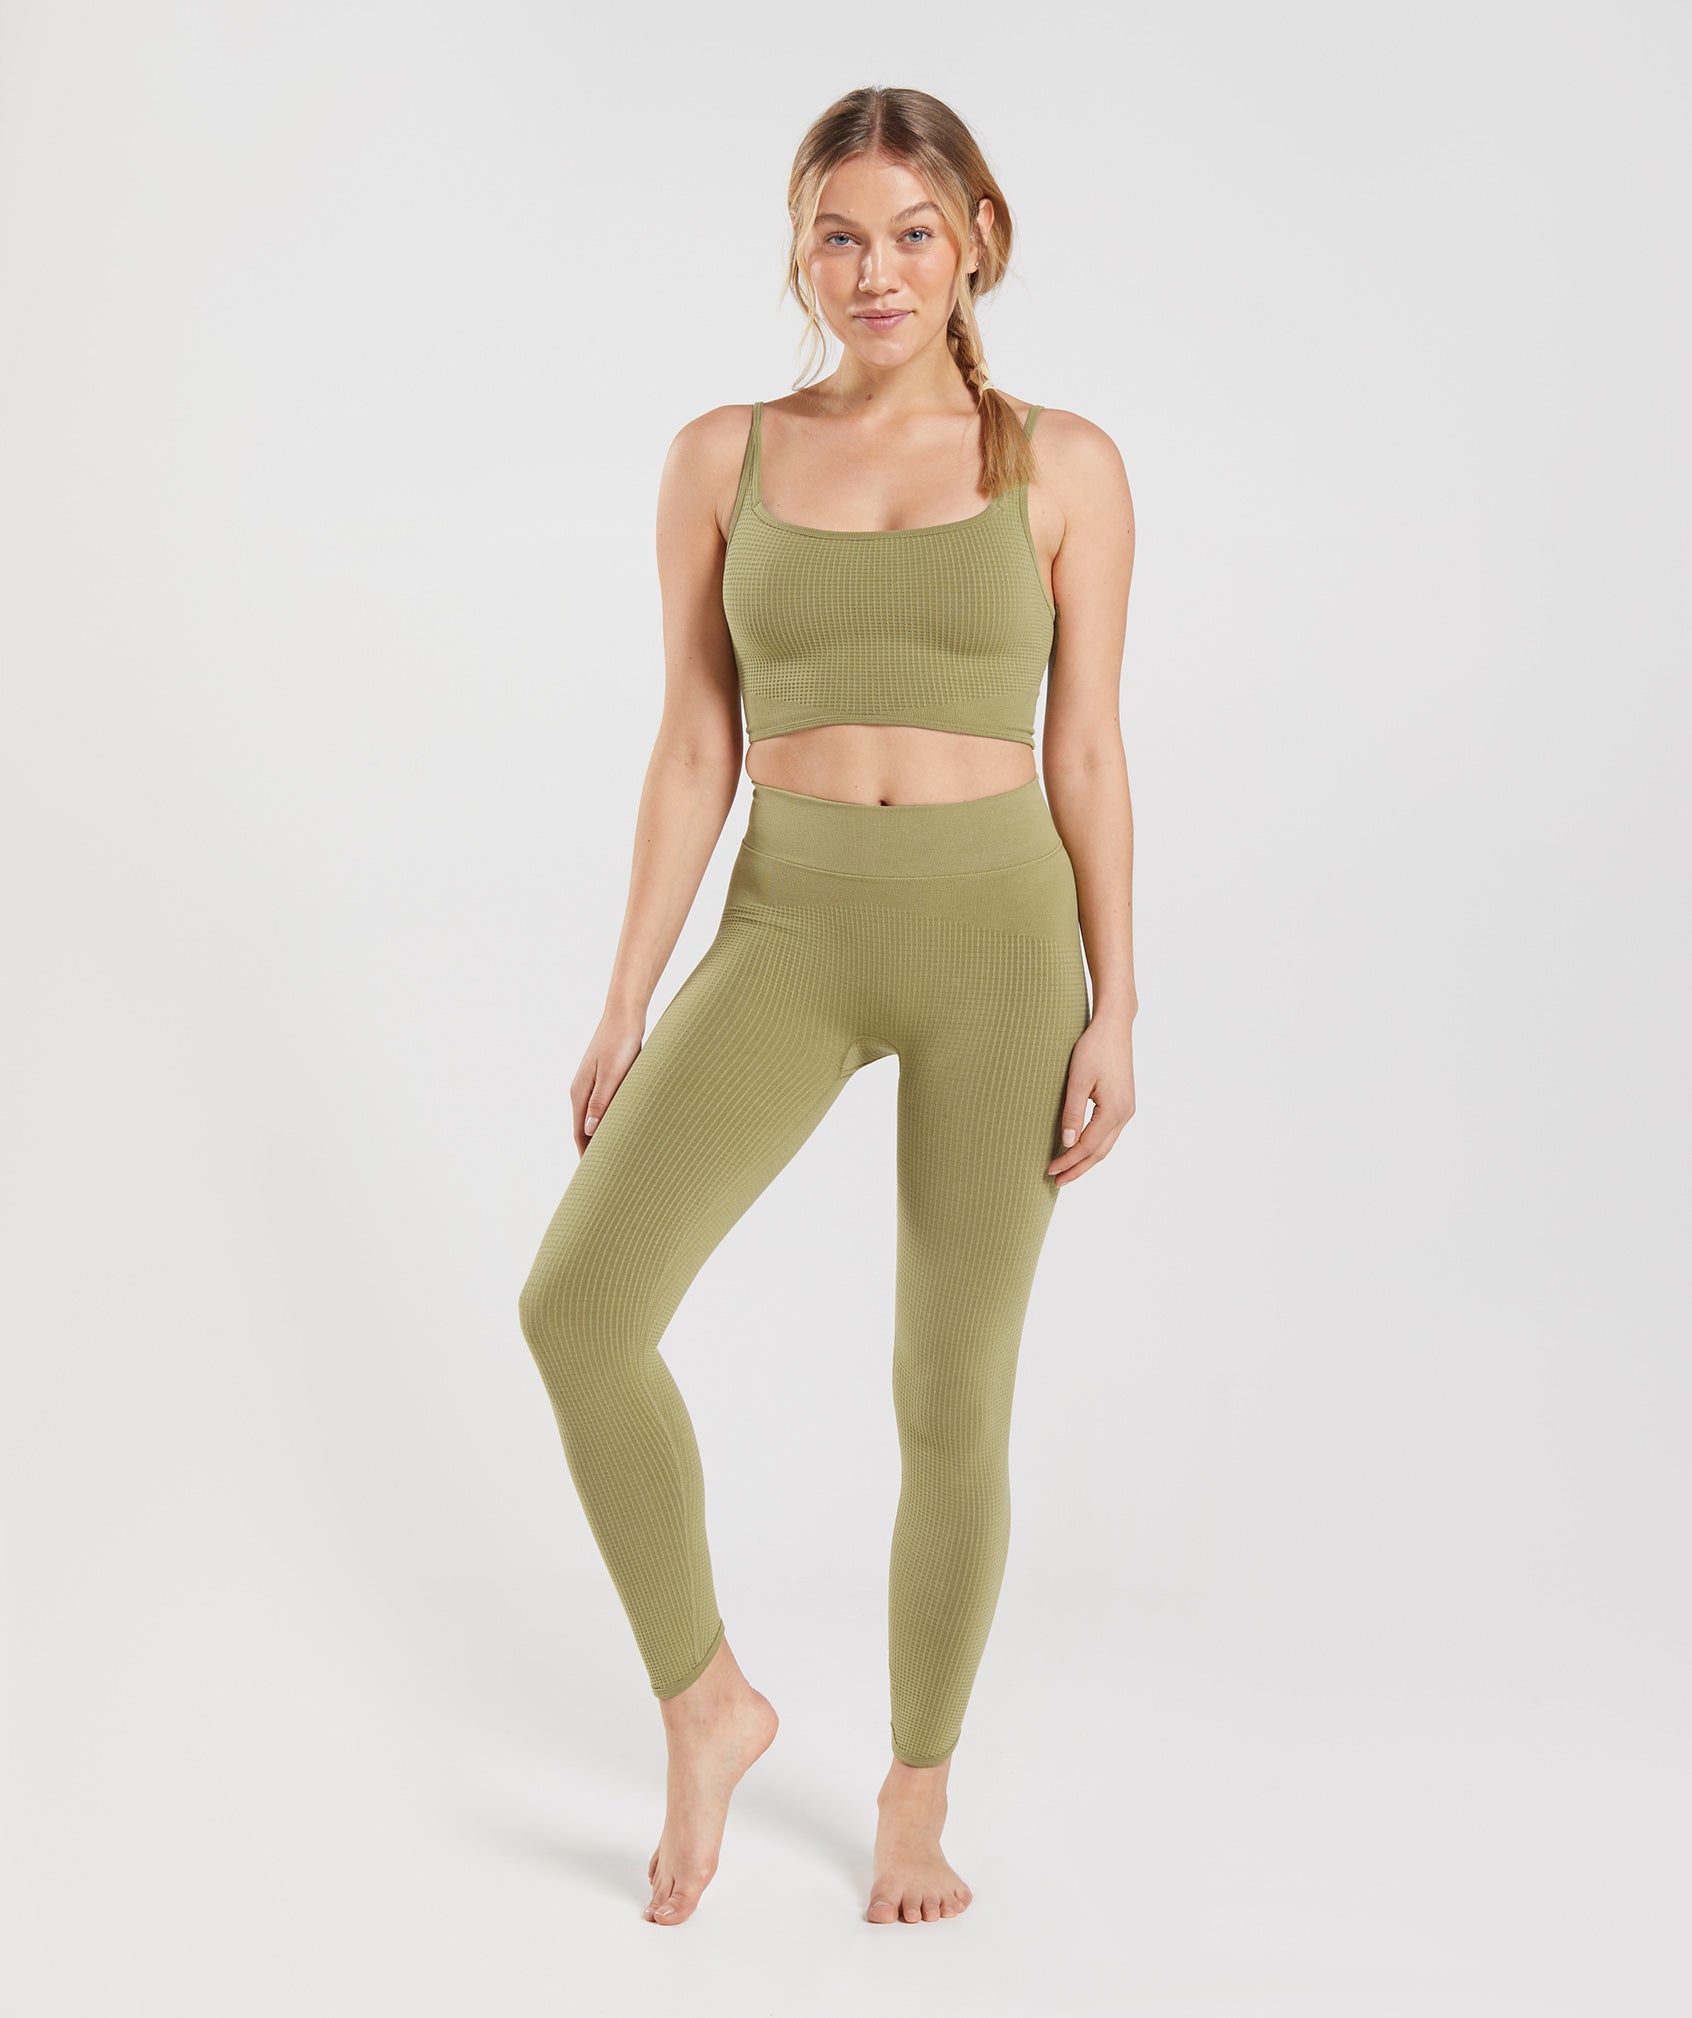 Pause Seamless Leggings in Griffin Green - view 4